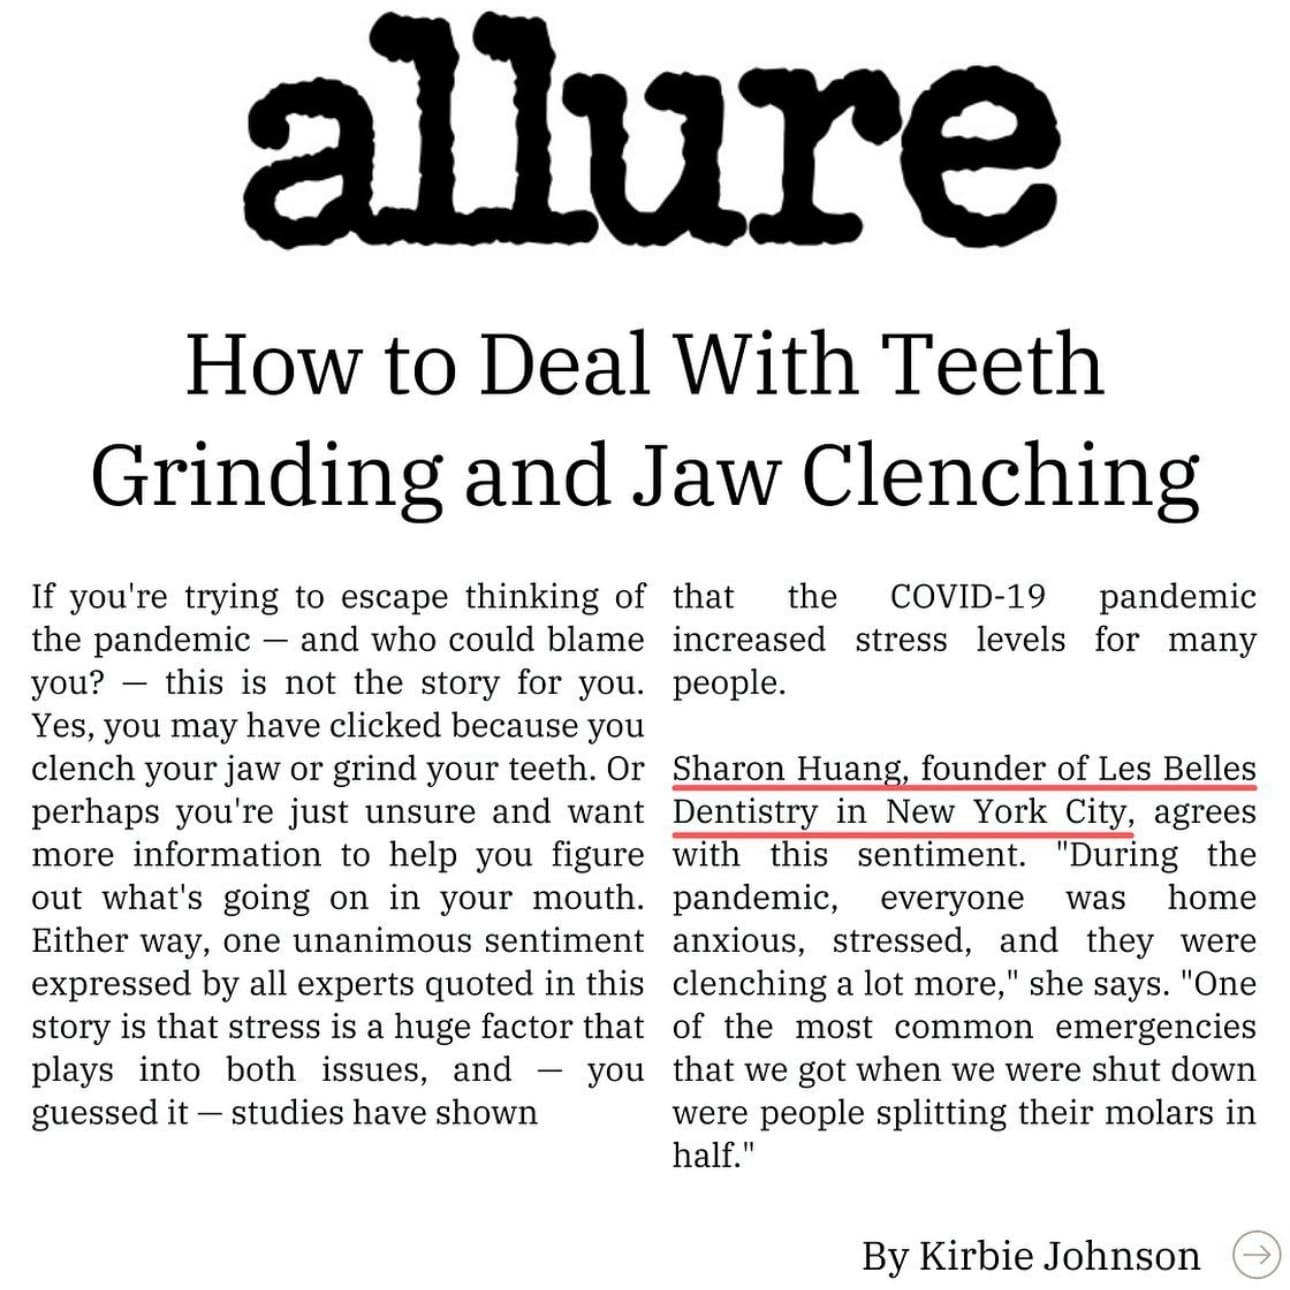 How to Deal With Teeth Grinding and Jaw Clenching